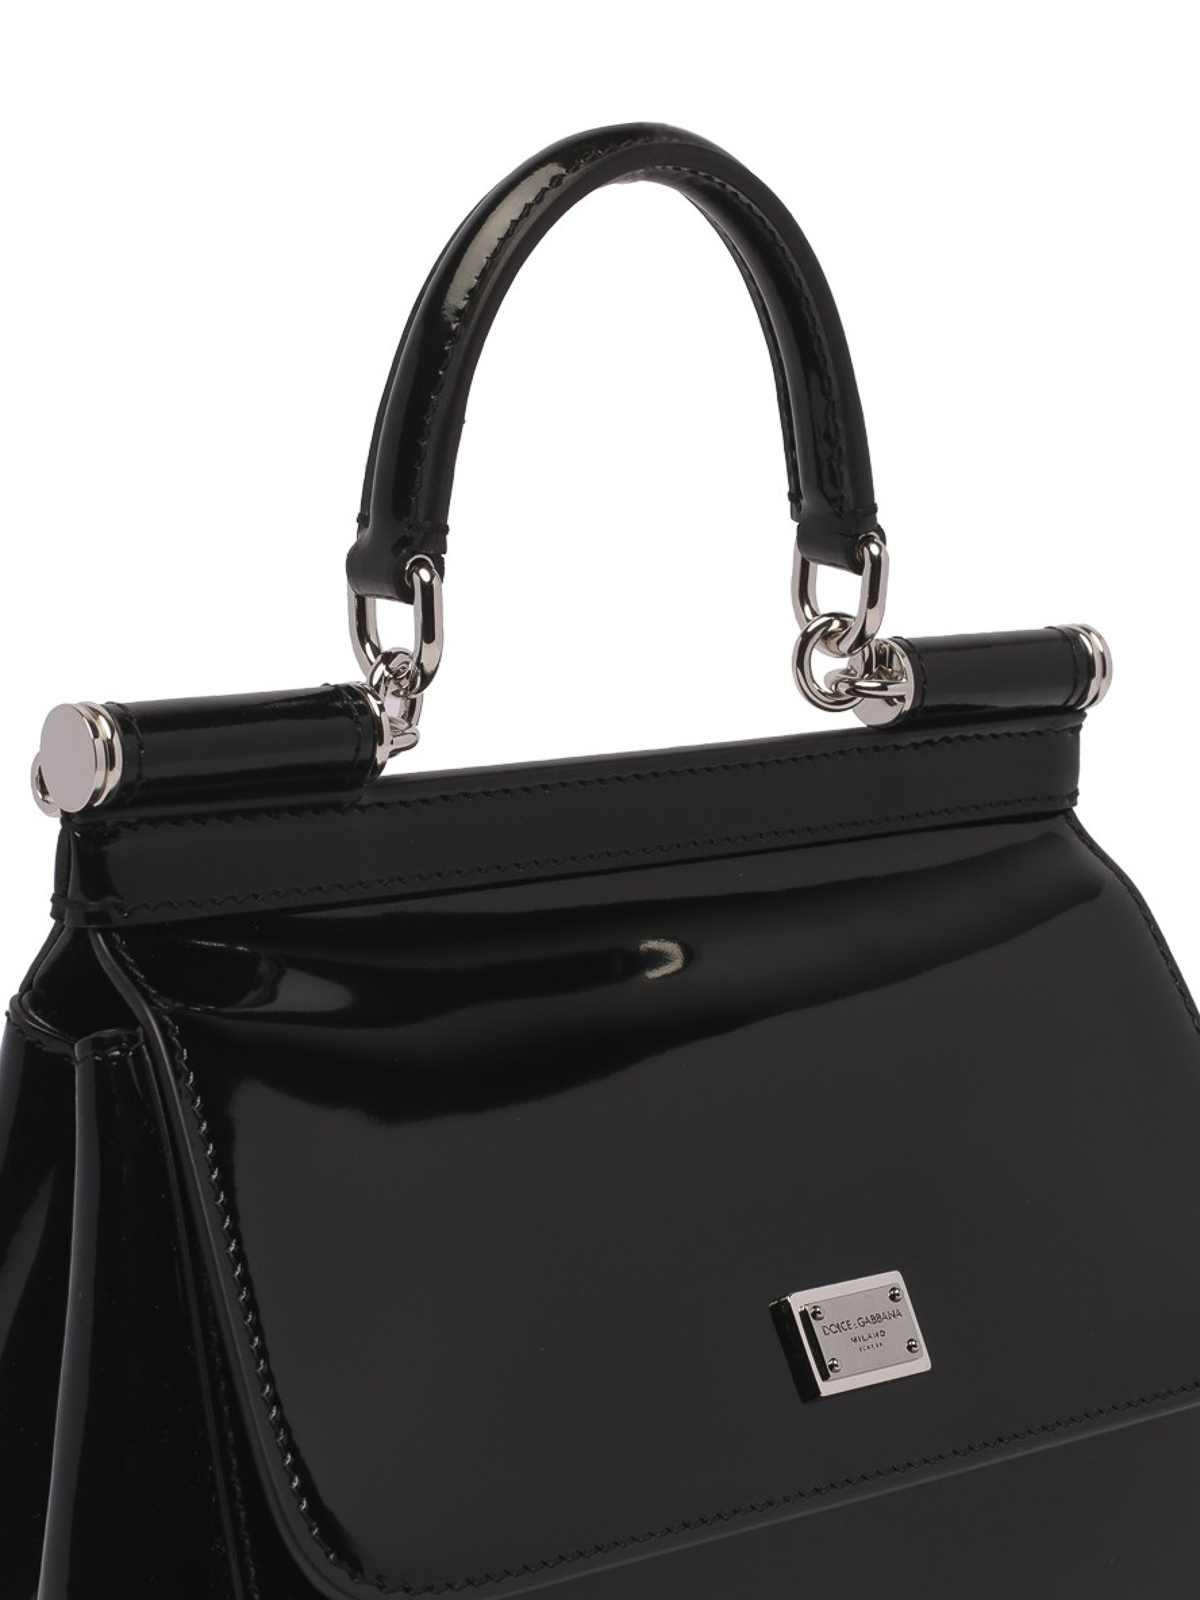 Dolce & Gabbana Sicily Bag in Patent Leather